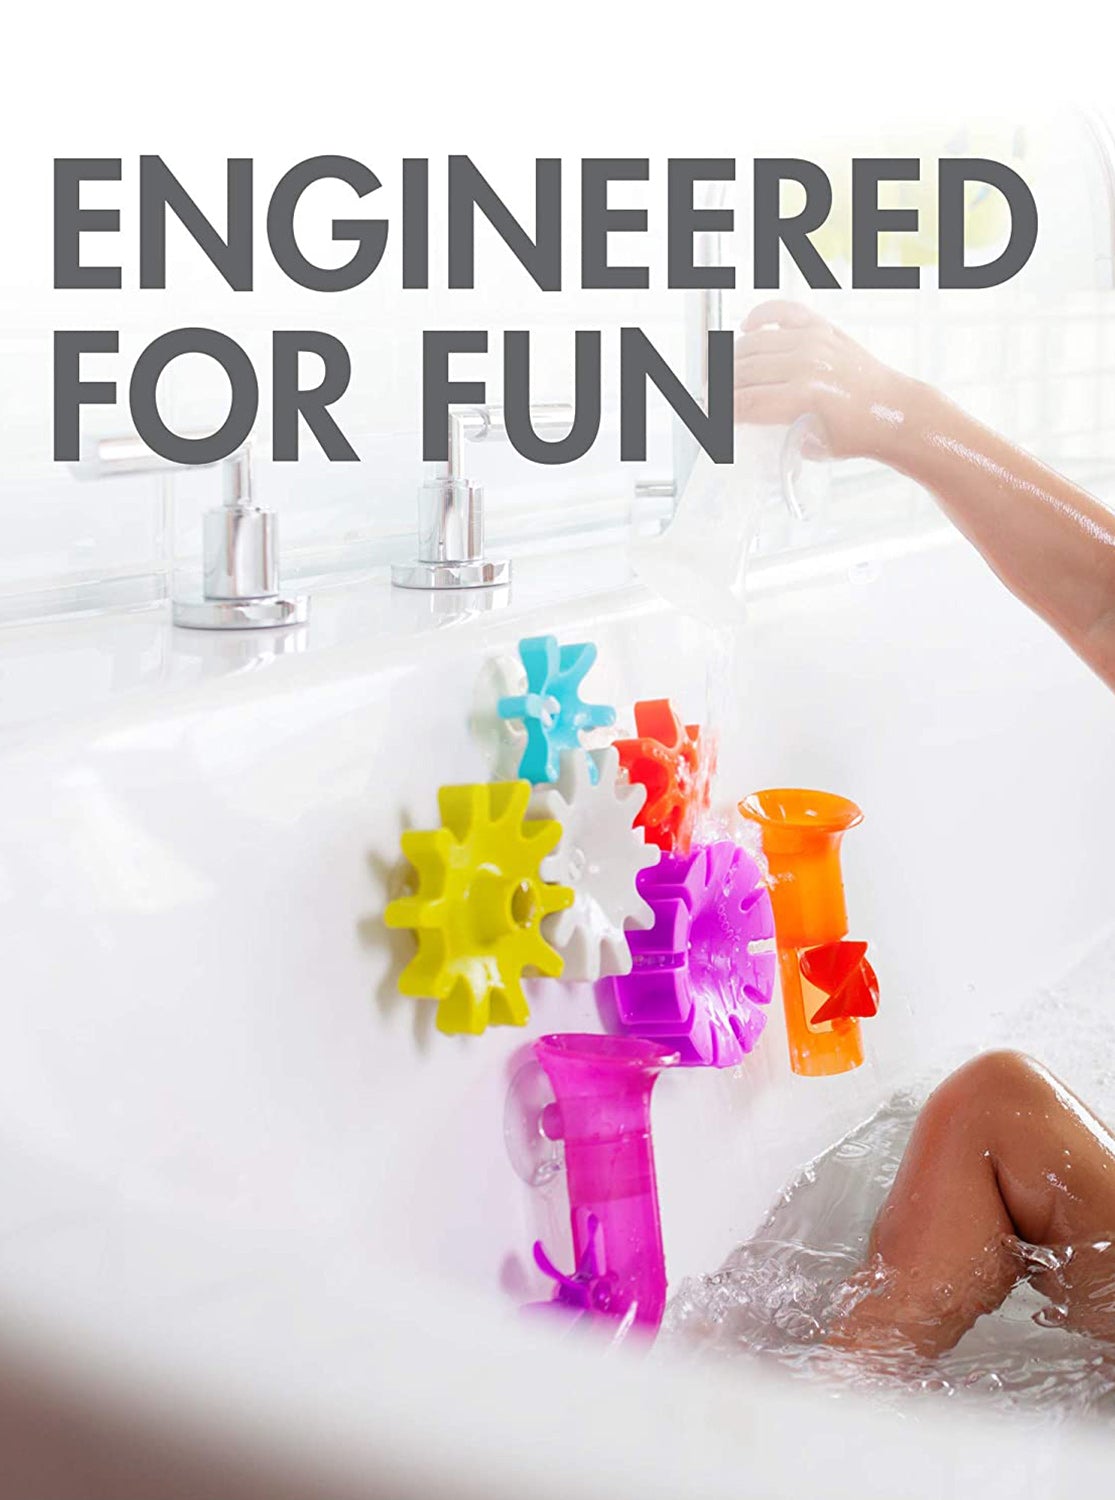 Boon Building Bath Toy Bundle with Pipes, Cogs and Tubes, Pack of 13 - ANB Baby -$20 - $50